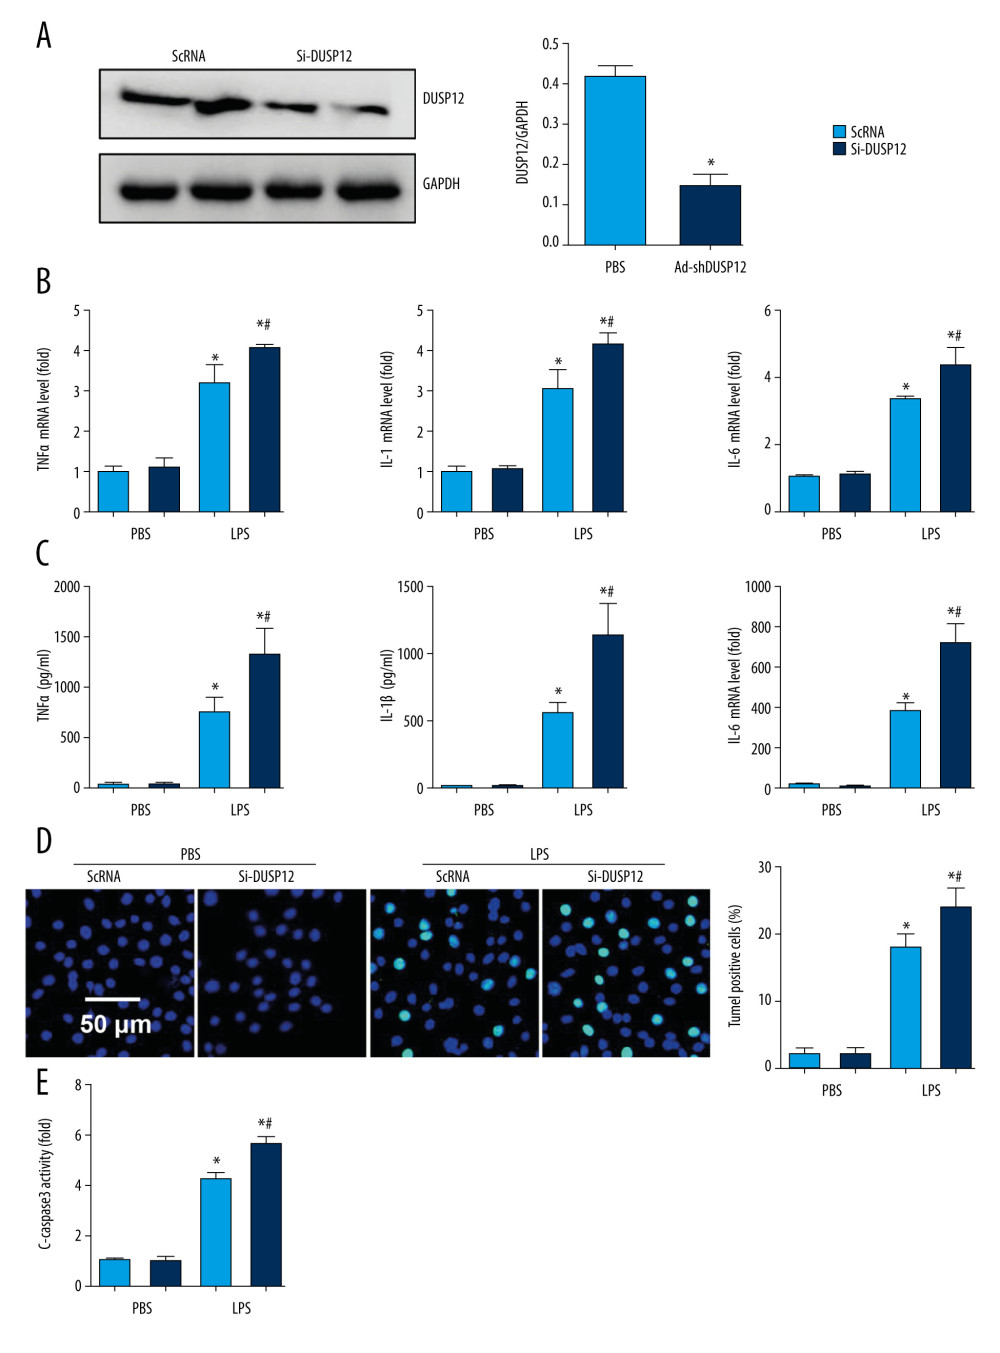 DUSP12 silencing worsened LPS-induced pulmonary endothelial cell injury. (A–E) MLECs were transfected with DUSP12 siRNA and treated with LPS. (A) Protein level of DUSP12 in MLECs transfected with siDUSP12. (B) mRNA levels of proinflammatory factors. (C) ELISA measurement of proinflammatory factors. (D) TUNEL staining (magnification: 200). (E) Caspase-3 activity (* P<0.05 vs ScRNA/PBS; # P<0.05 vs ScRNA/LPS). All in vitro studies were repeated 3 times independently.